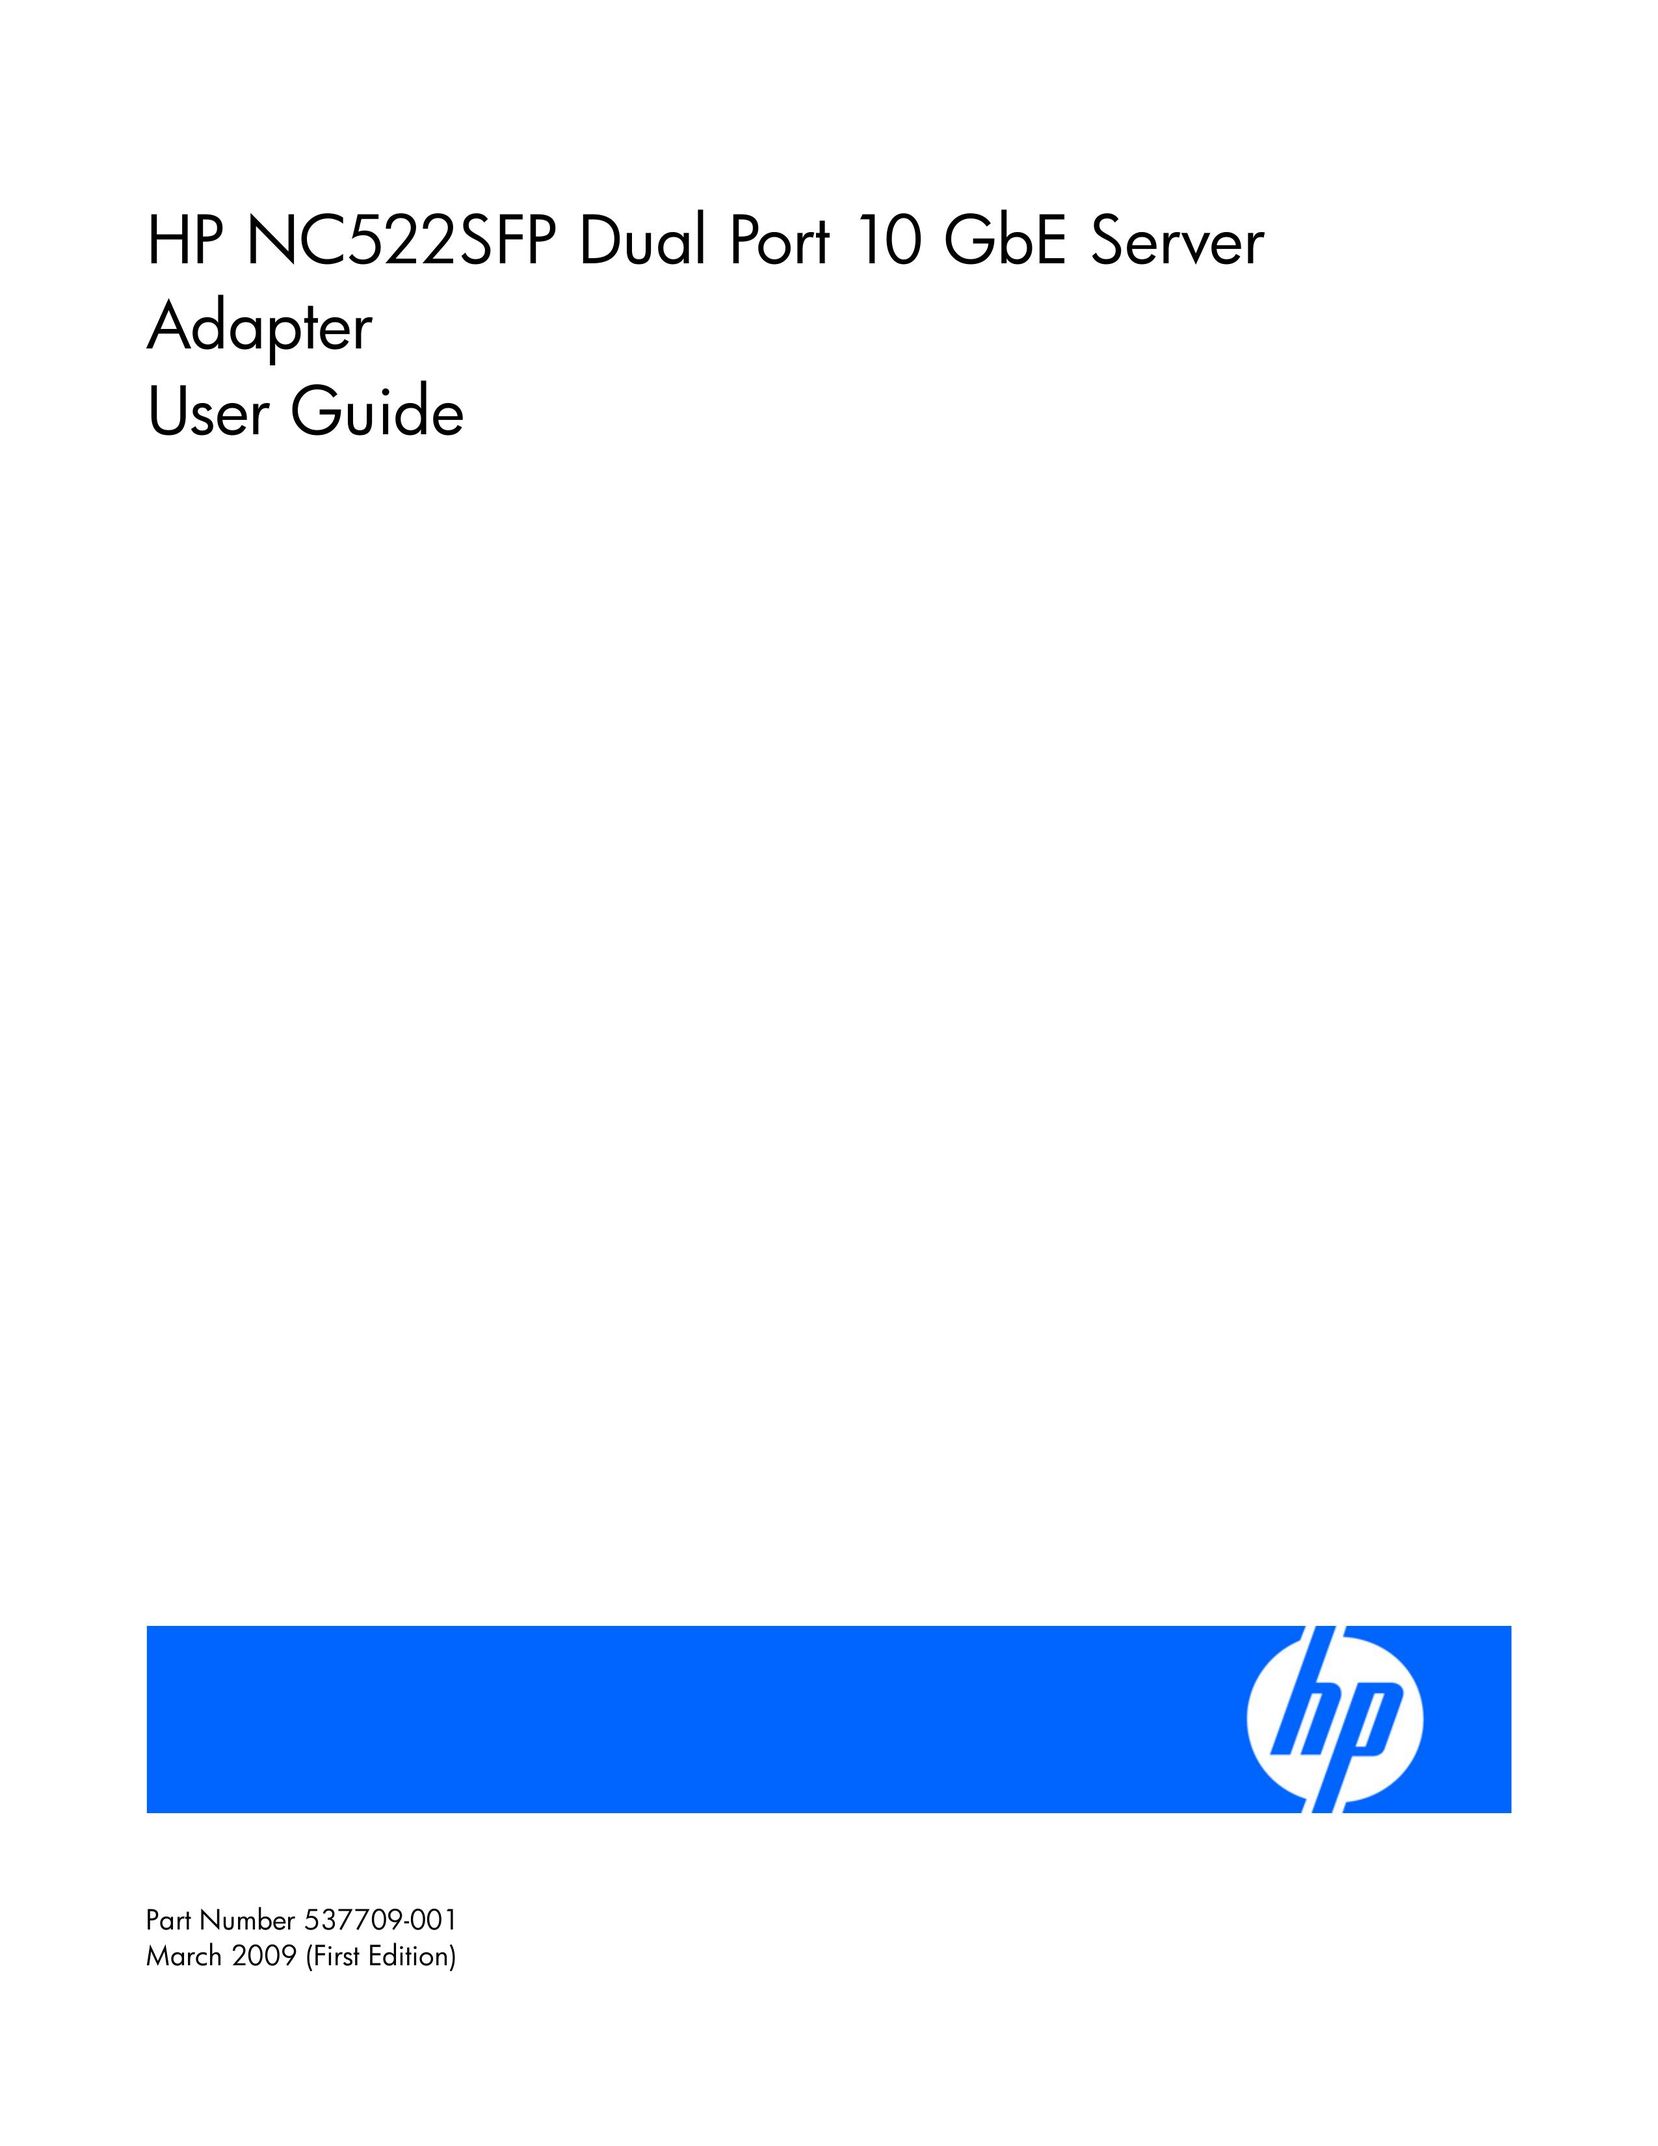 HP (Hewlett-Packard) NC522SFP Network Cables User Manual